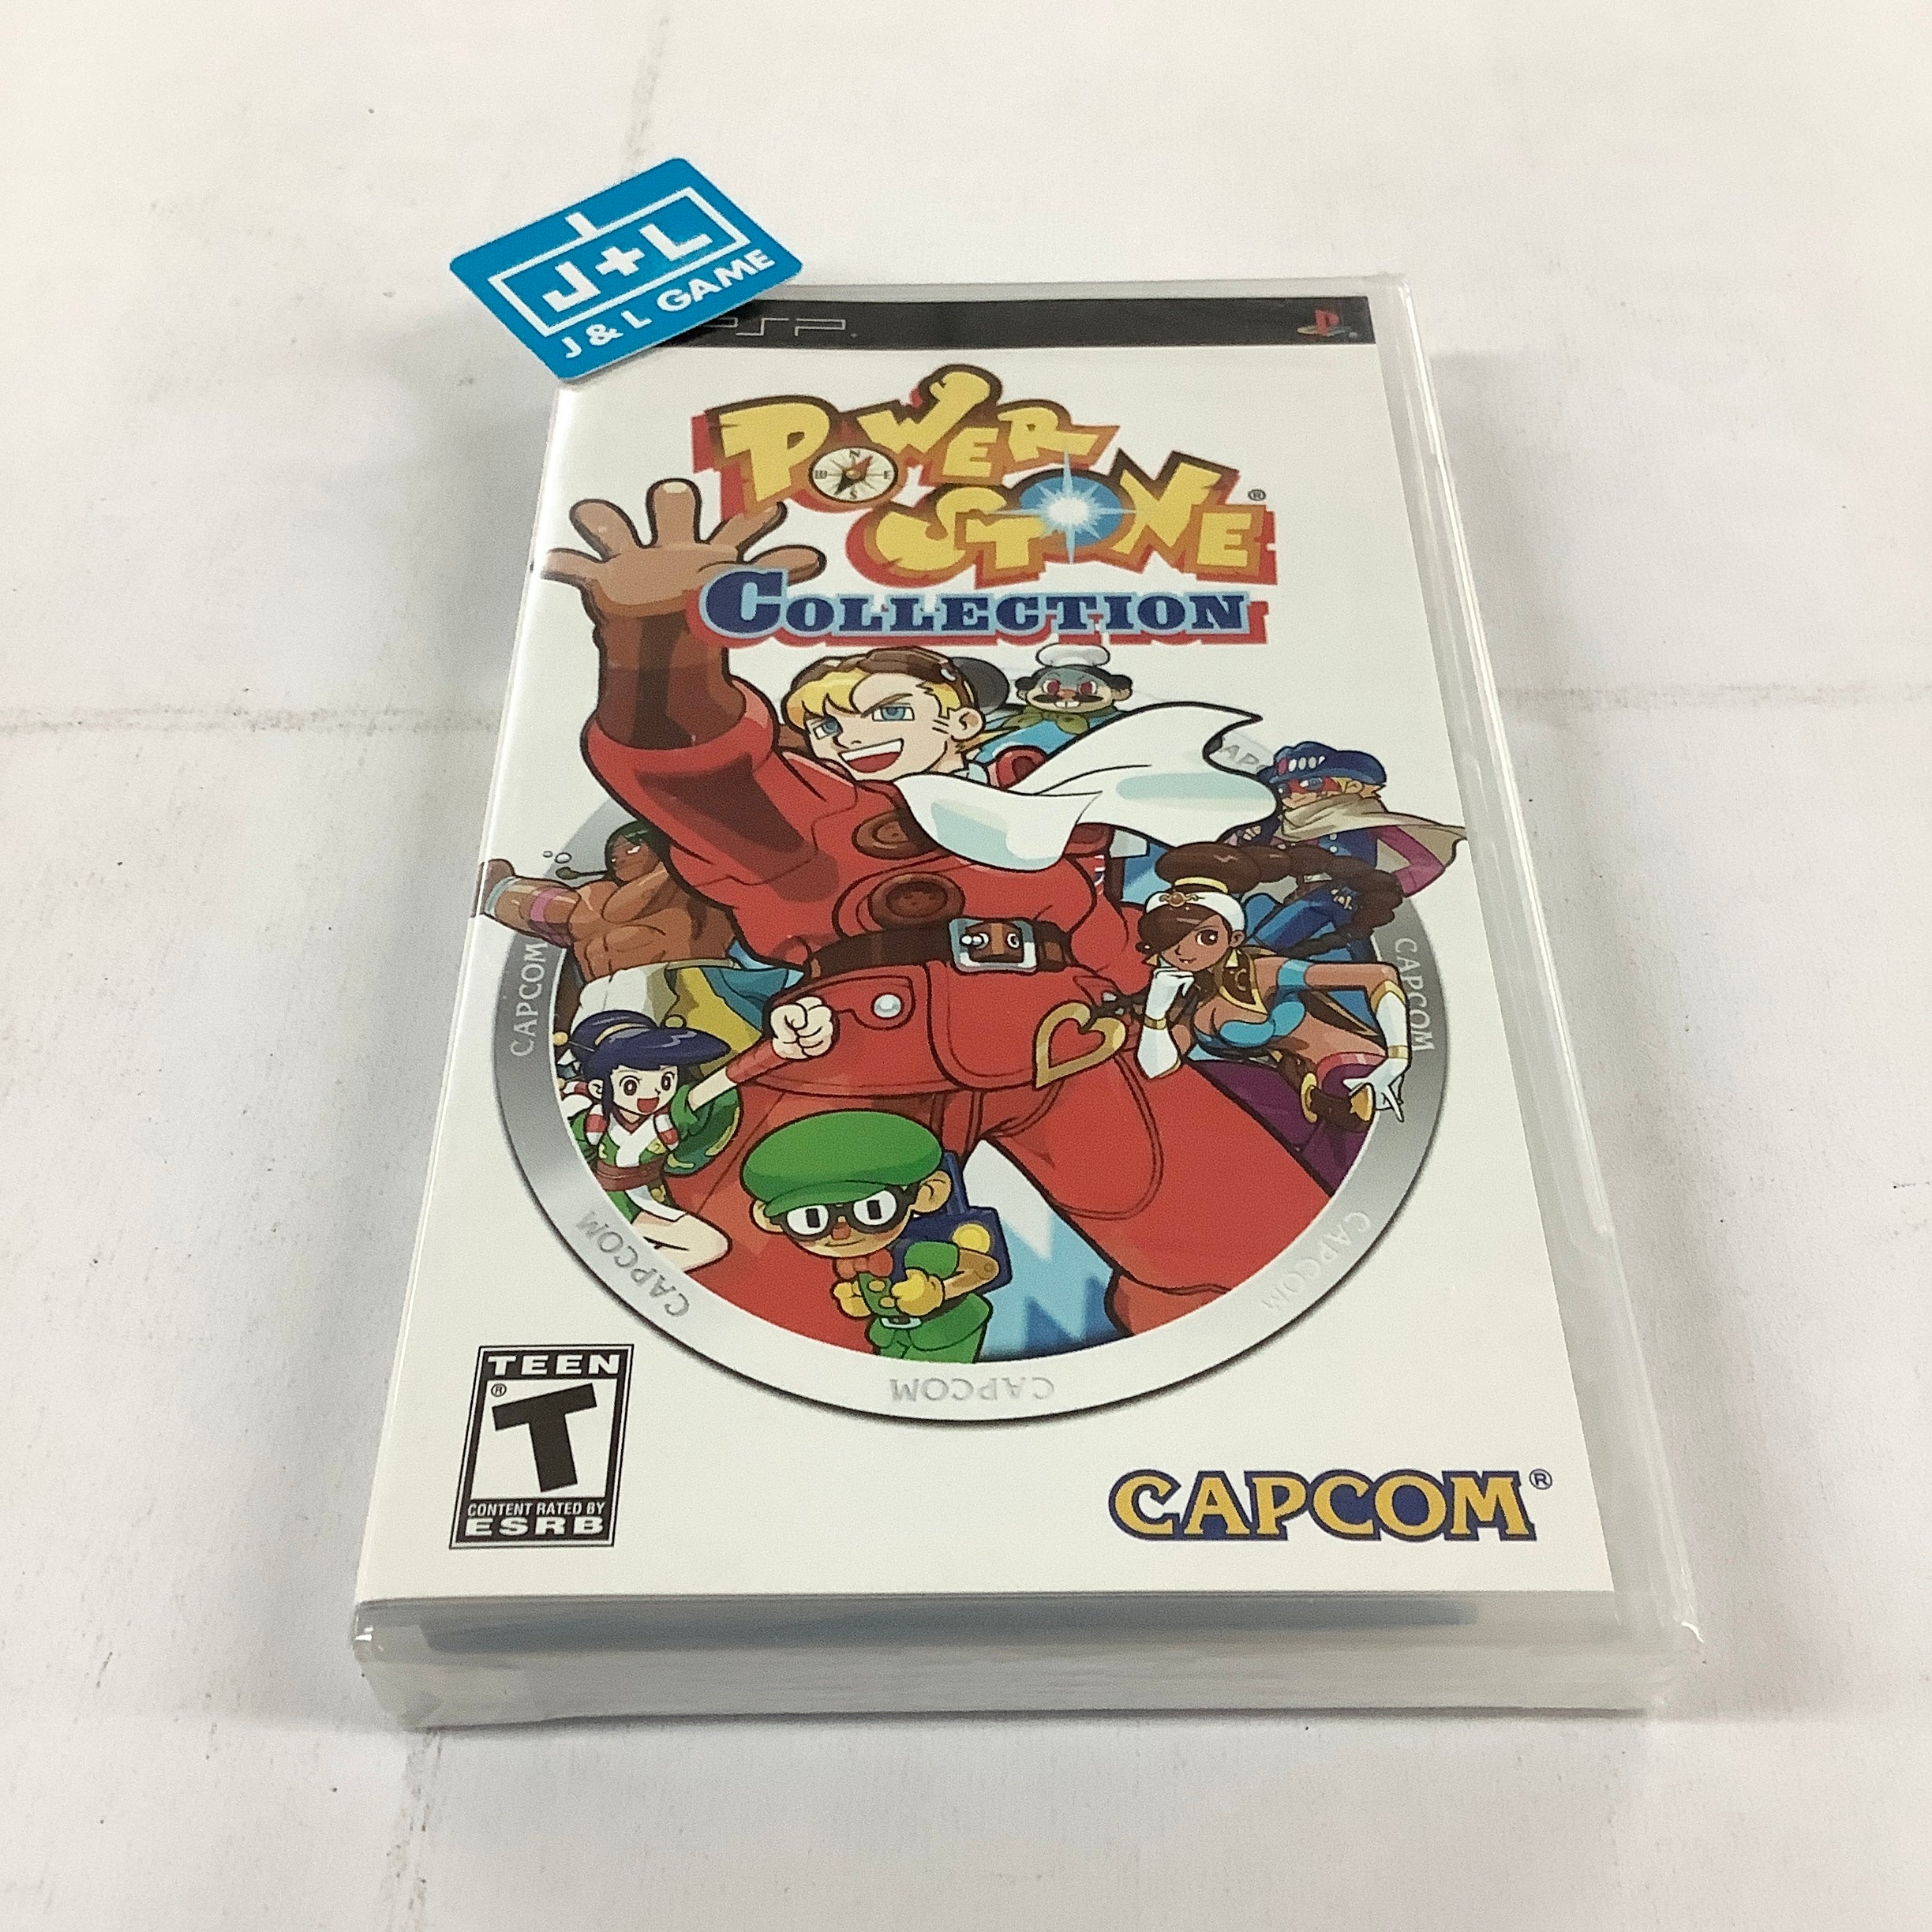 Power Stone Collection - Sony PSP Video Games Capcom   